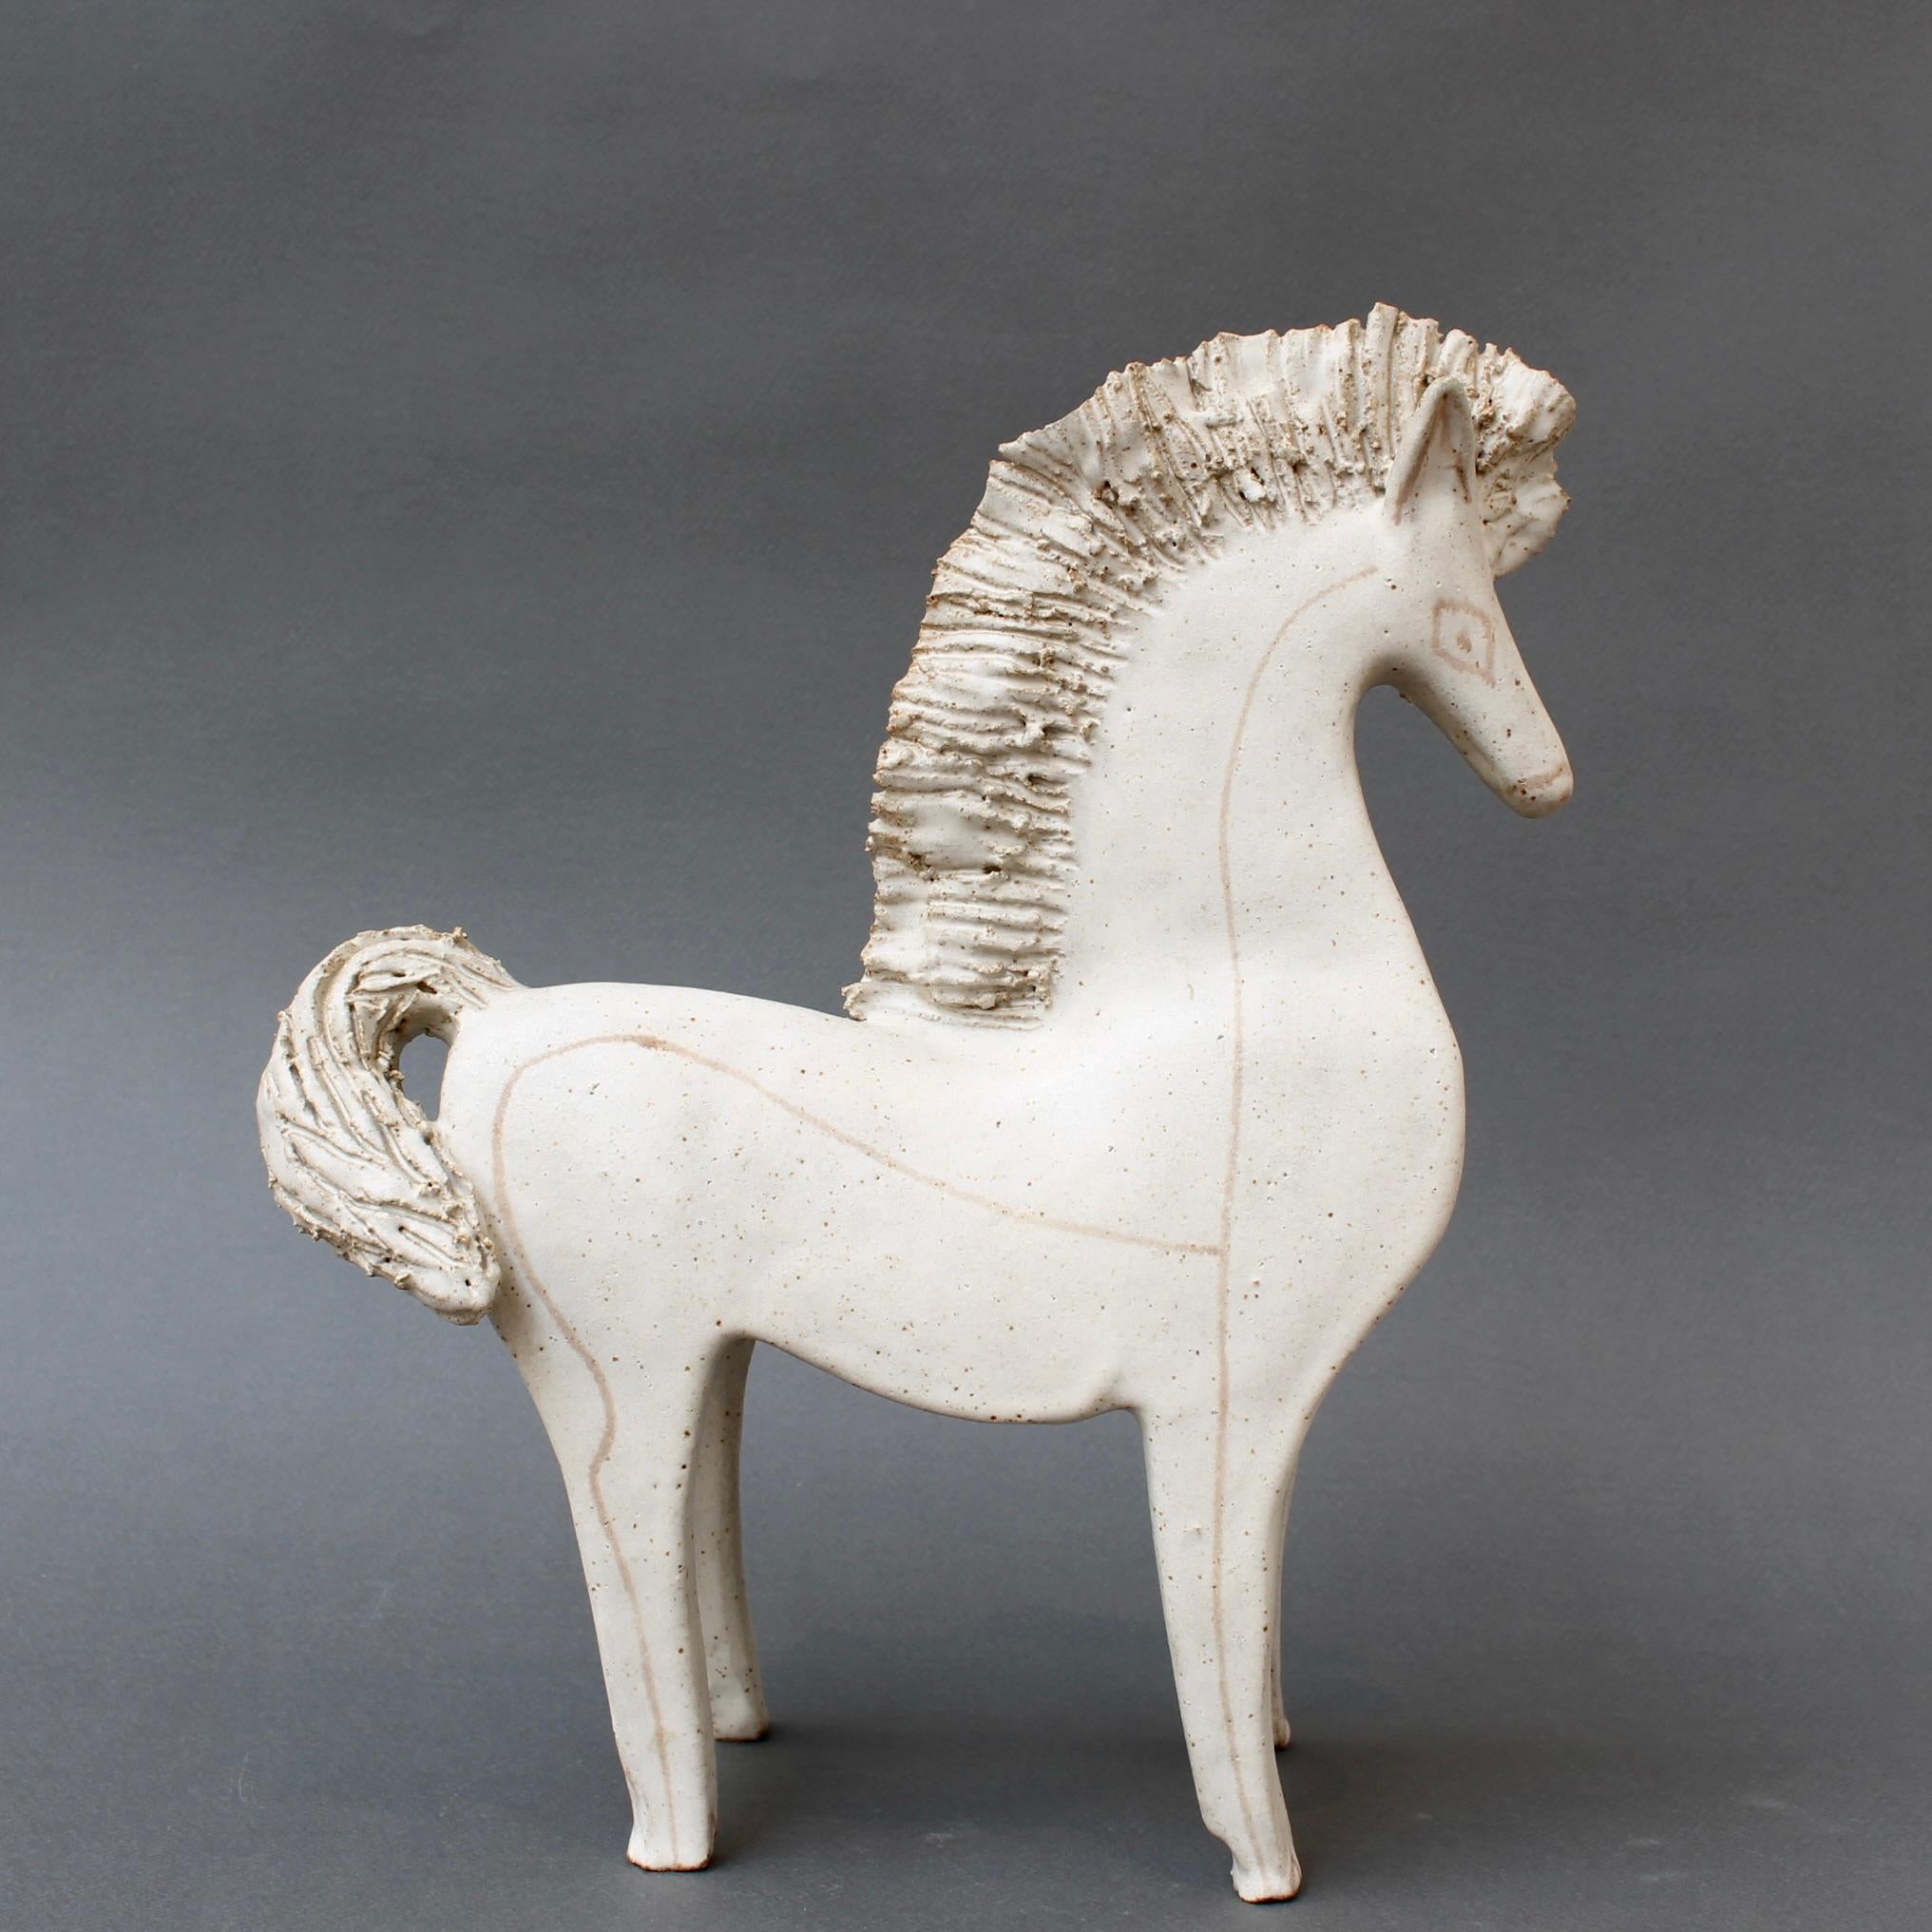 Vintage Ceramic Horse by Bruno Gambone (circa 1970s) - Large For Sale 1